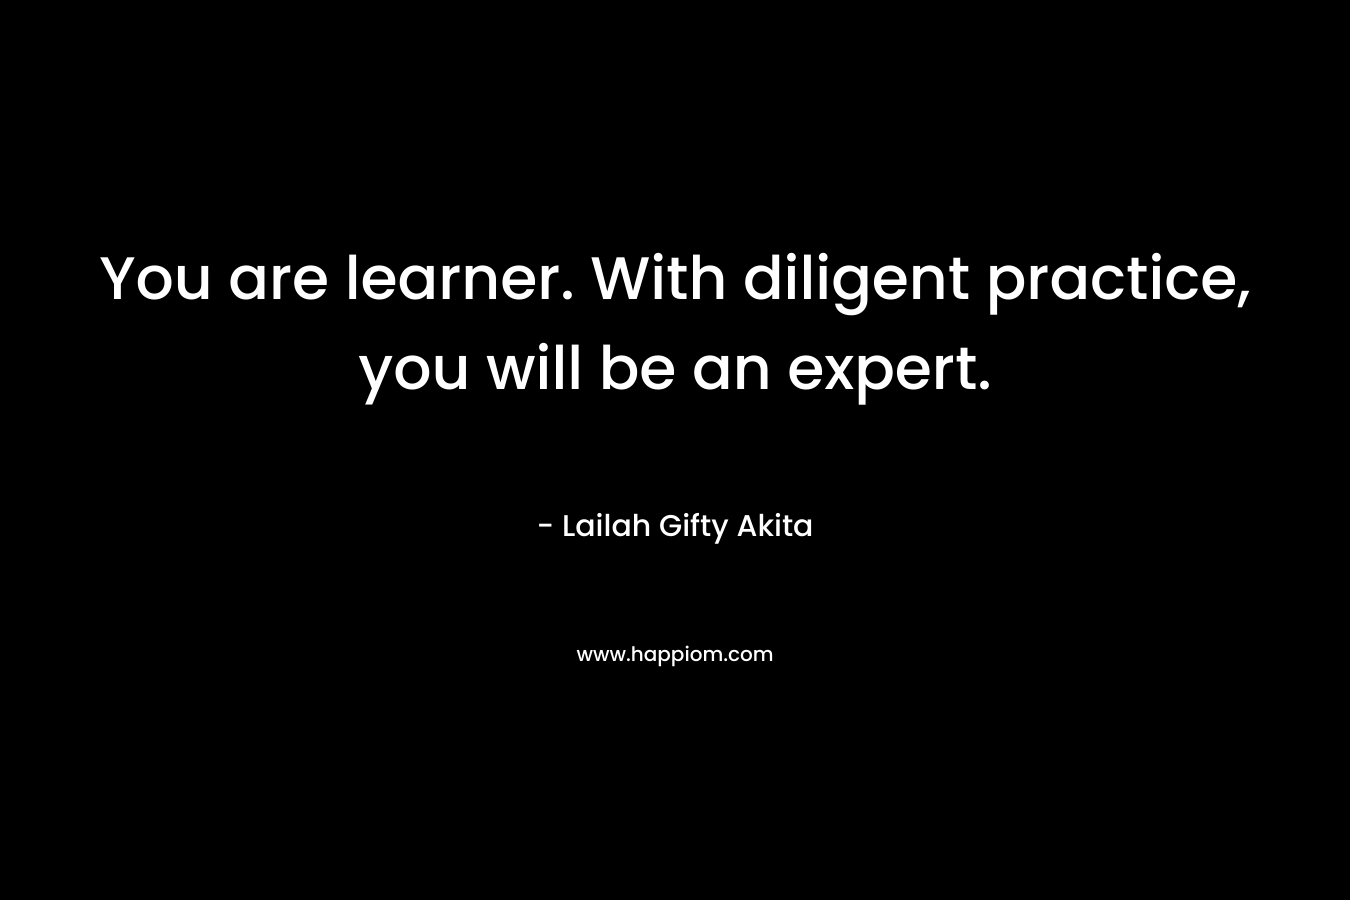 You are learner. With diligent practice, you will be an expert.